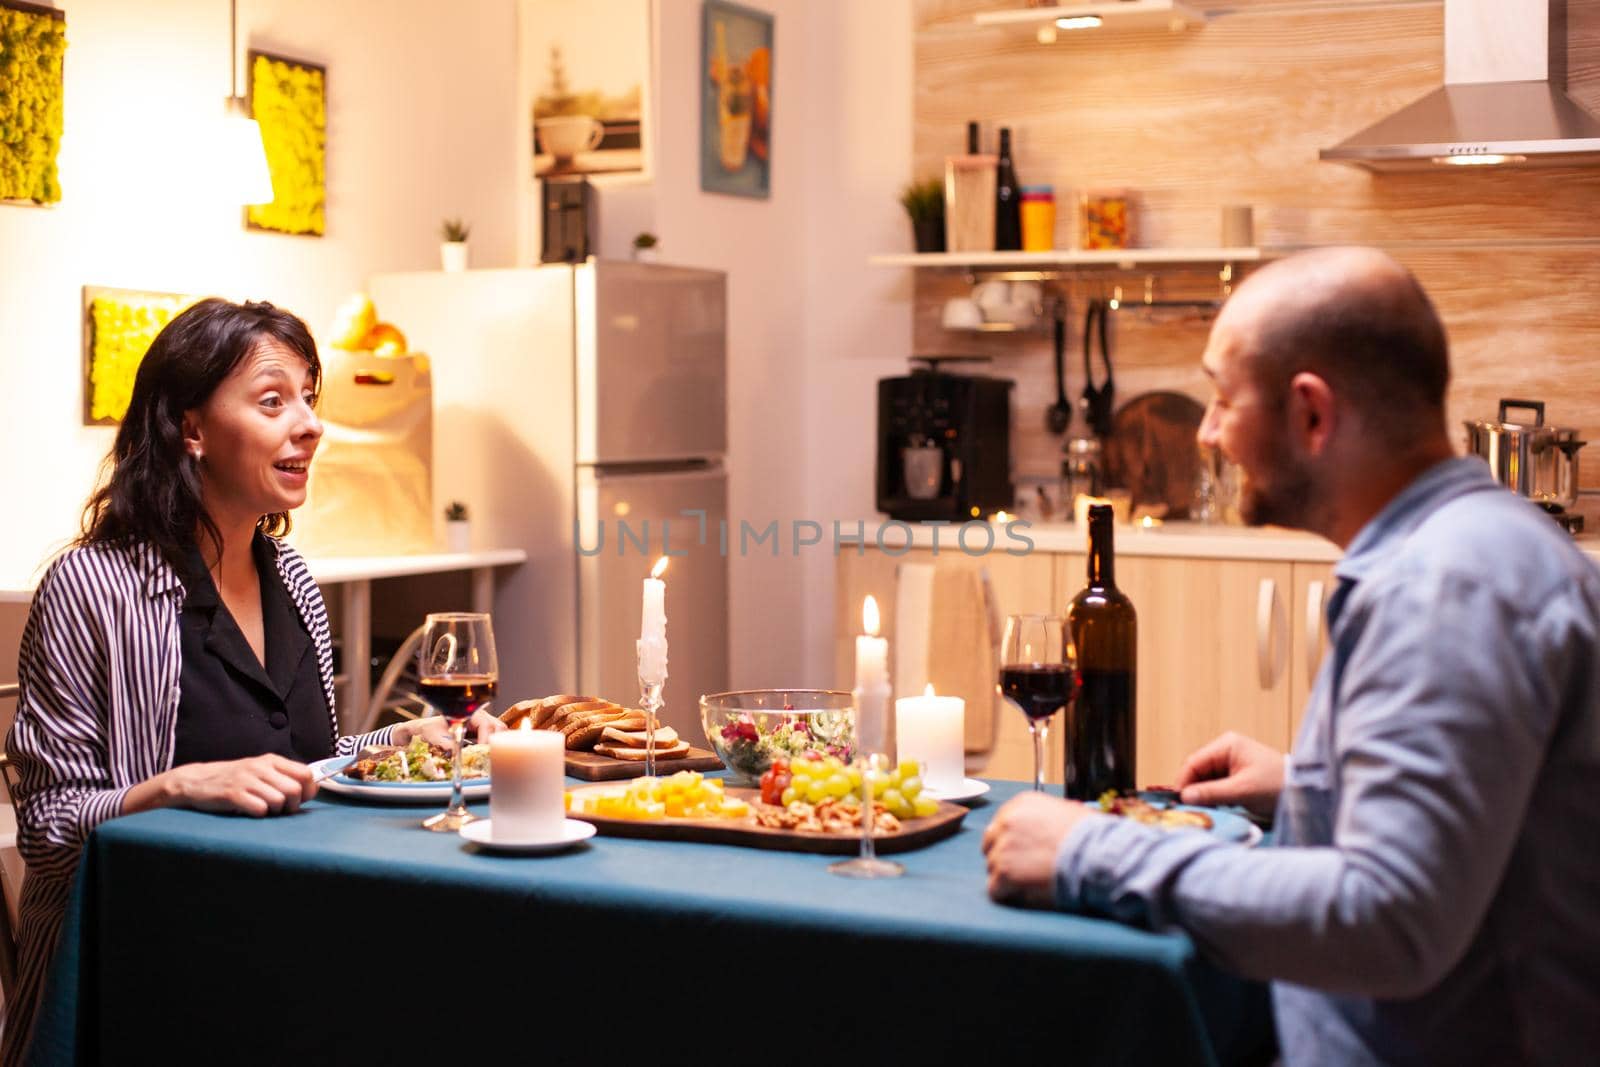 Wife looking surprised at husband during romantic dinner in kitchen. Talking happy sitting at table dining room, enjoying the meal at home having romantic time at candle lights.